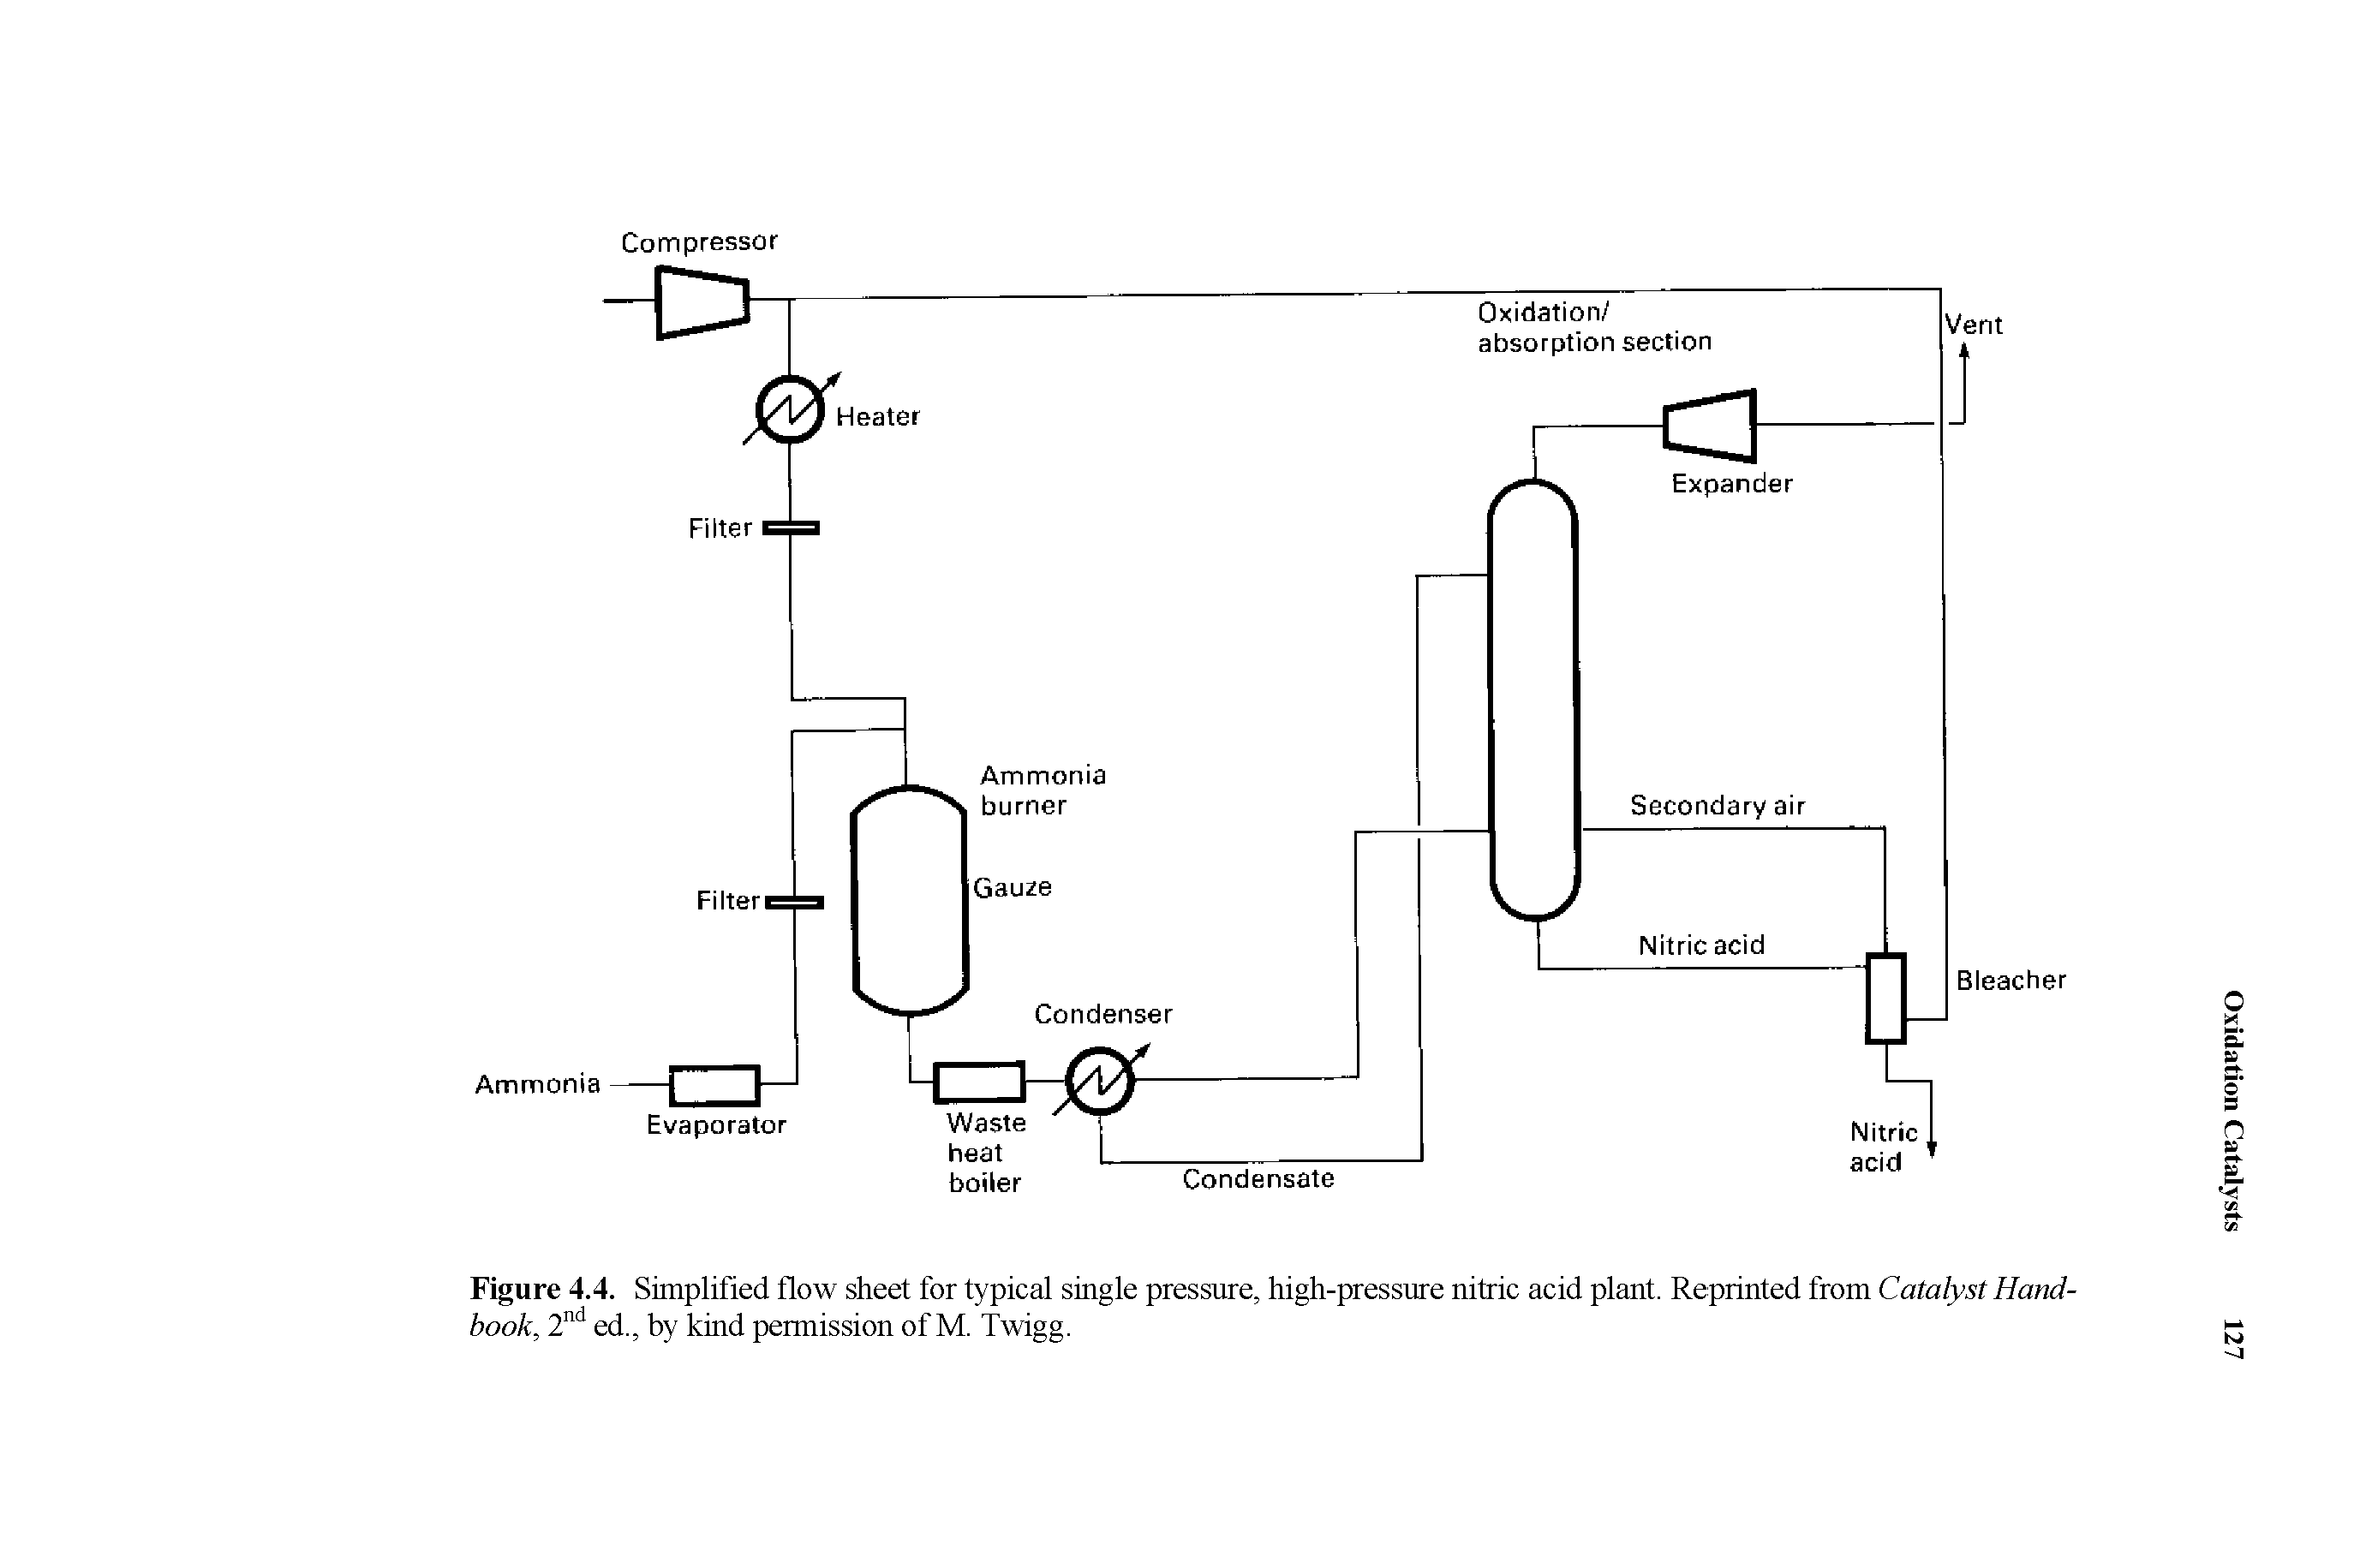 Figure 4.4. Simplified flow sheet for typical single pressure, high-pressure nitric acid plant. Reprinted from Catalyst Handbook, 2 ed., by kind permission of M. Twigg.